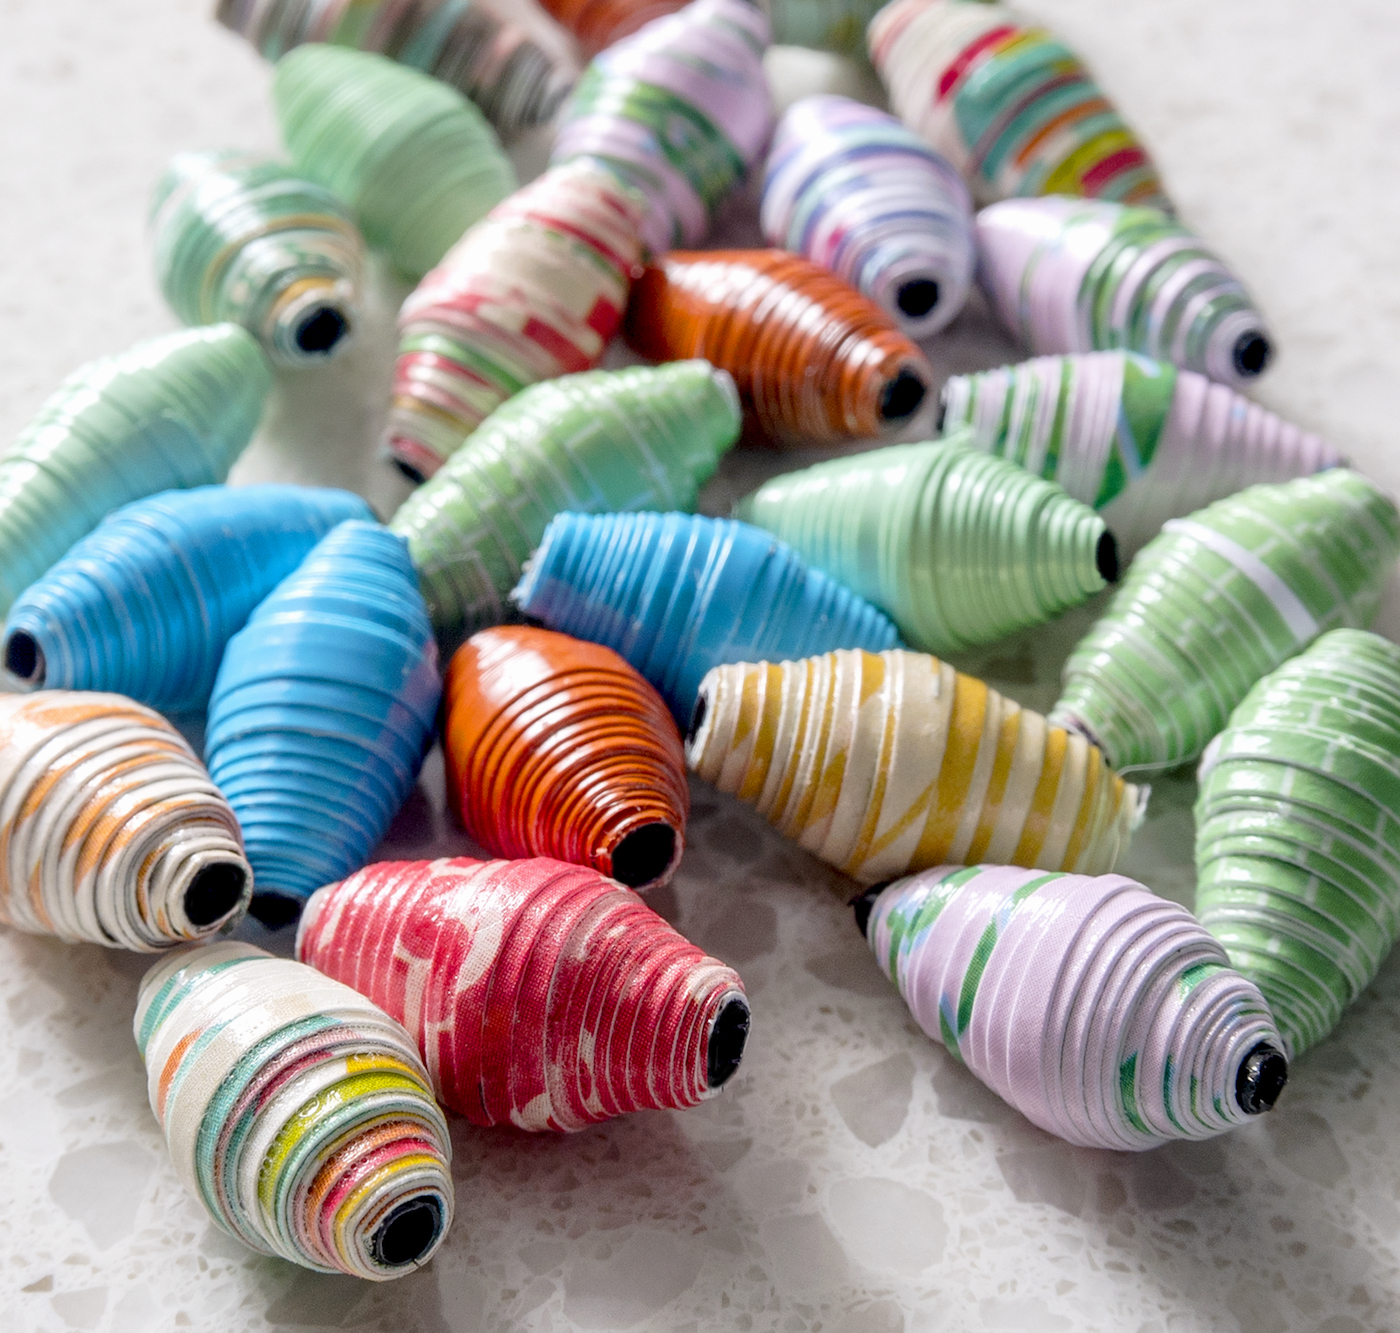 Paper Beads You Can Make in Minutes! - Mod Podge Rocks